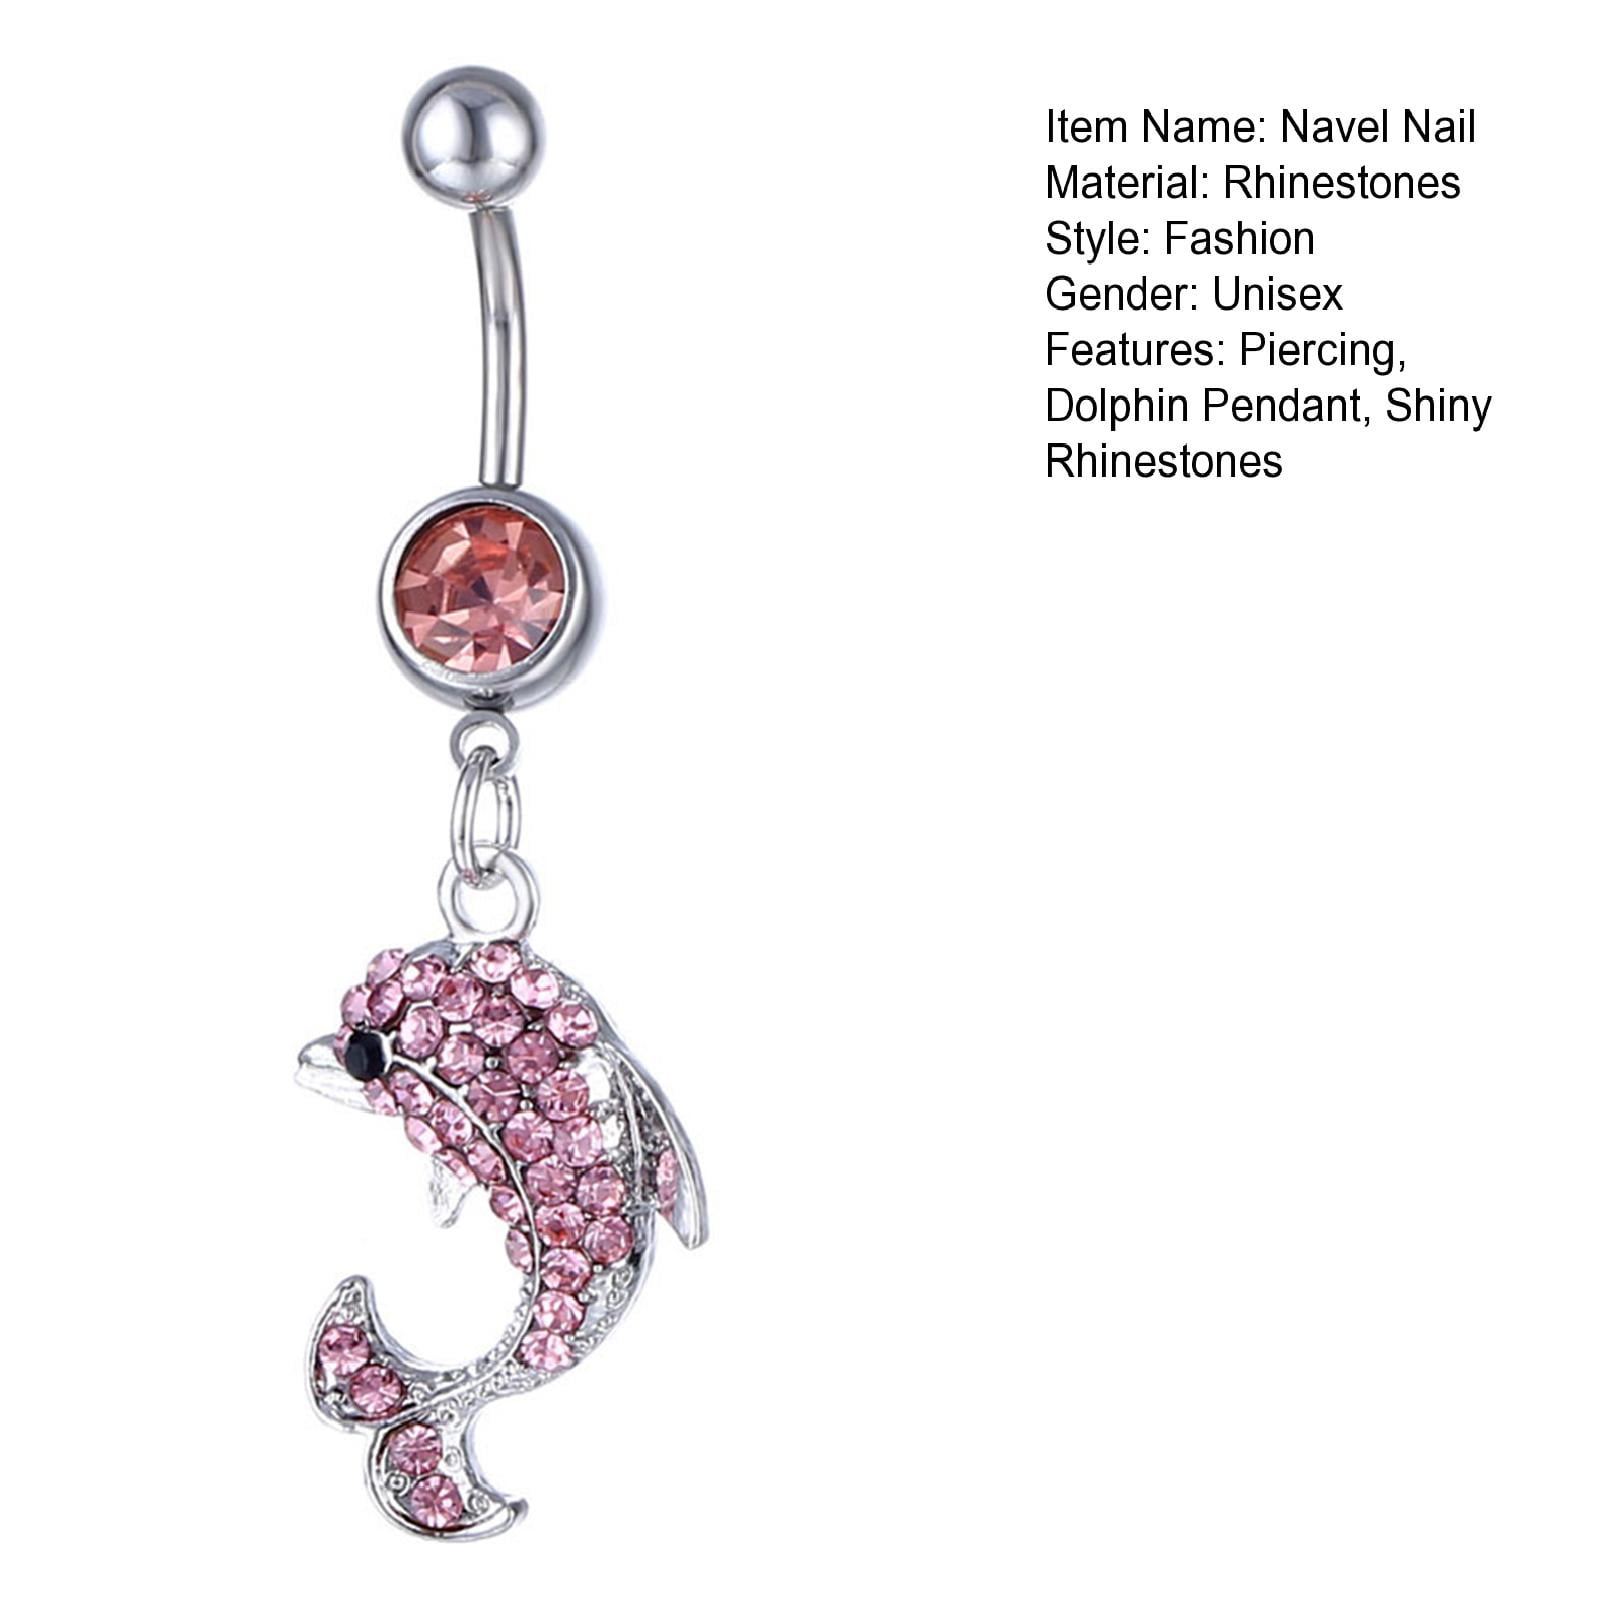 rygai 1Pc Navel Nail Sexy Piercing Shiny Rhinestones Non-allergic  Decorative Gift Dolphin Pendant Belly Button Ring Body Jewelry for Daily  Wear,Pink